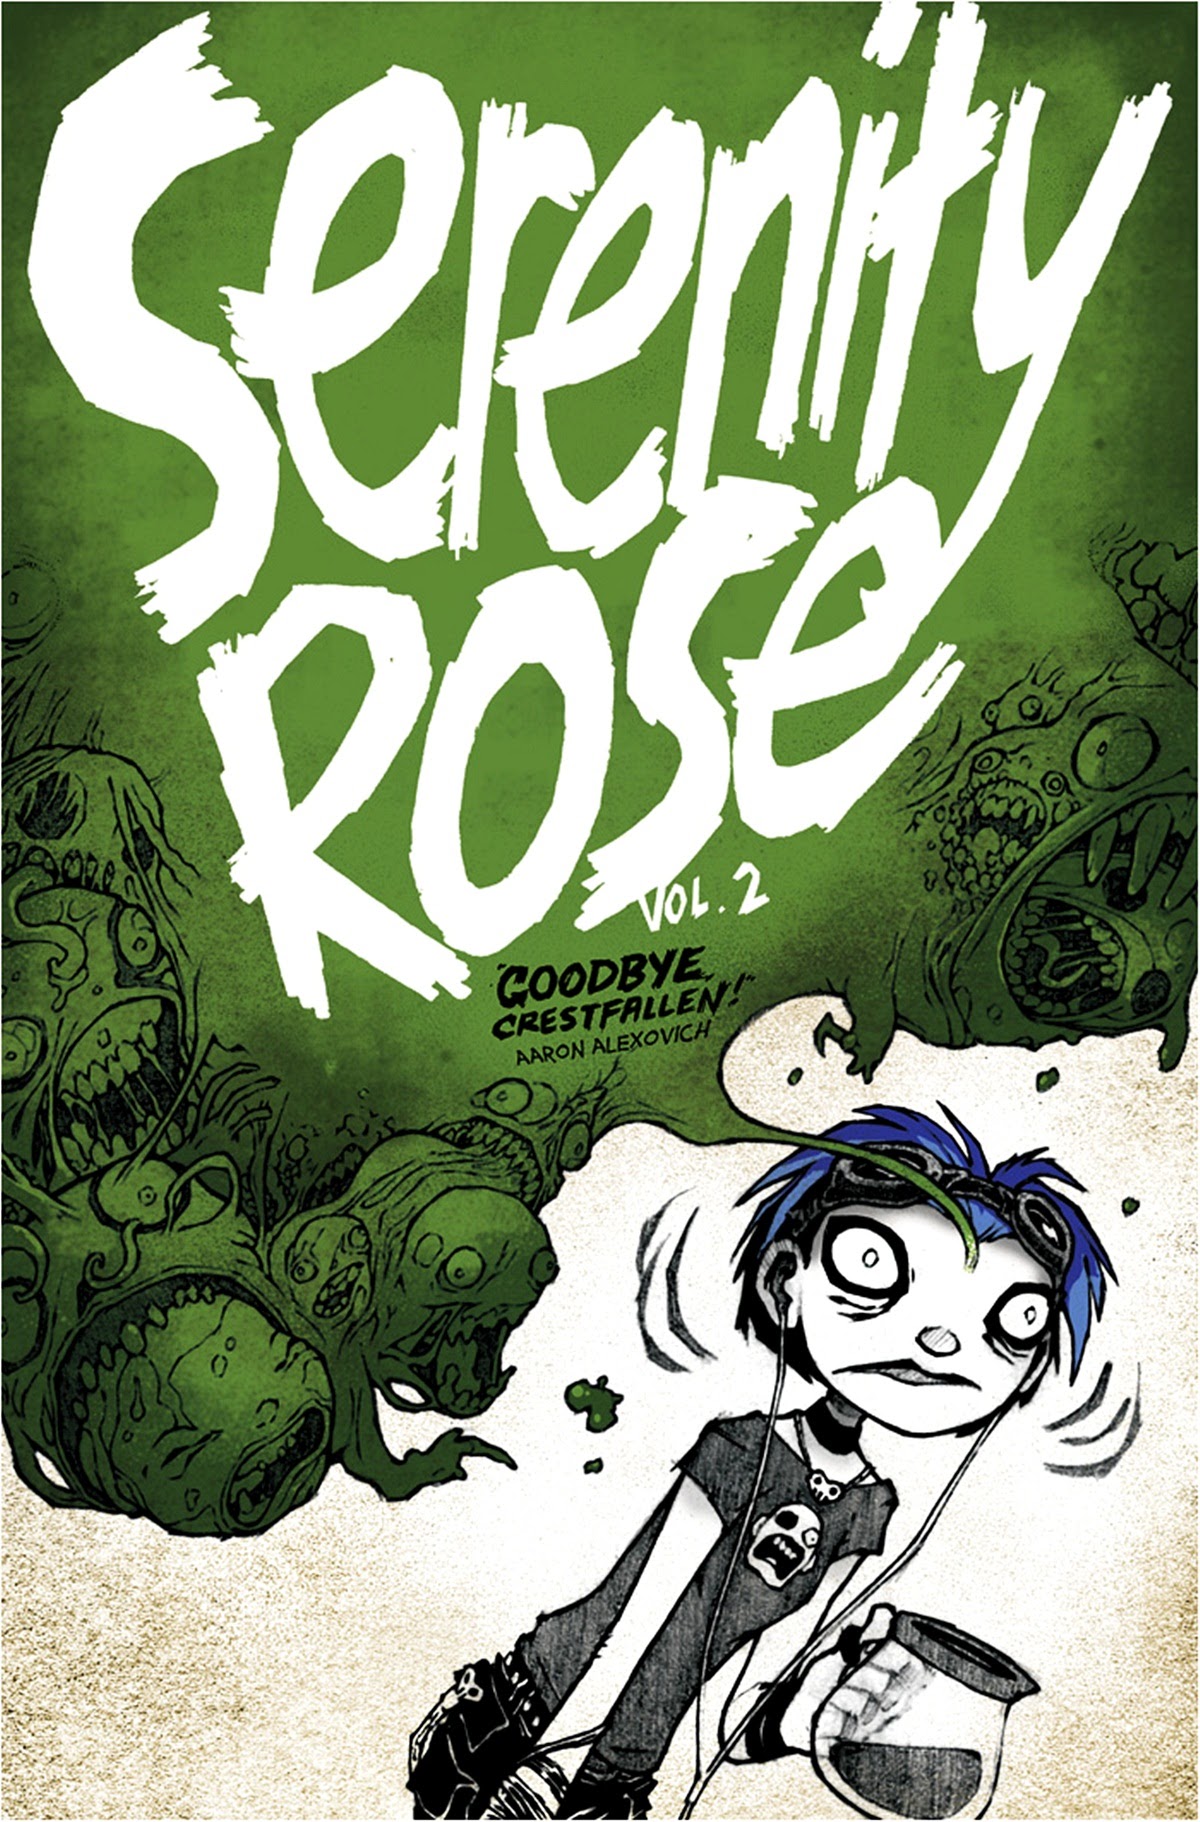 Read online Serenity Rose comic -  Issue # TPB 2 - 1